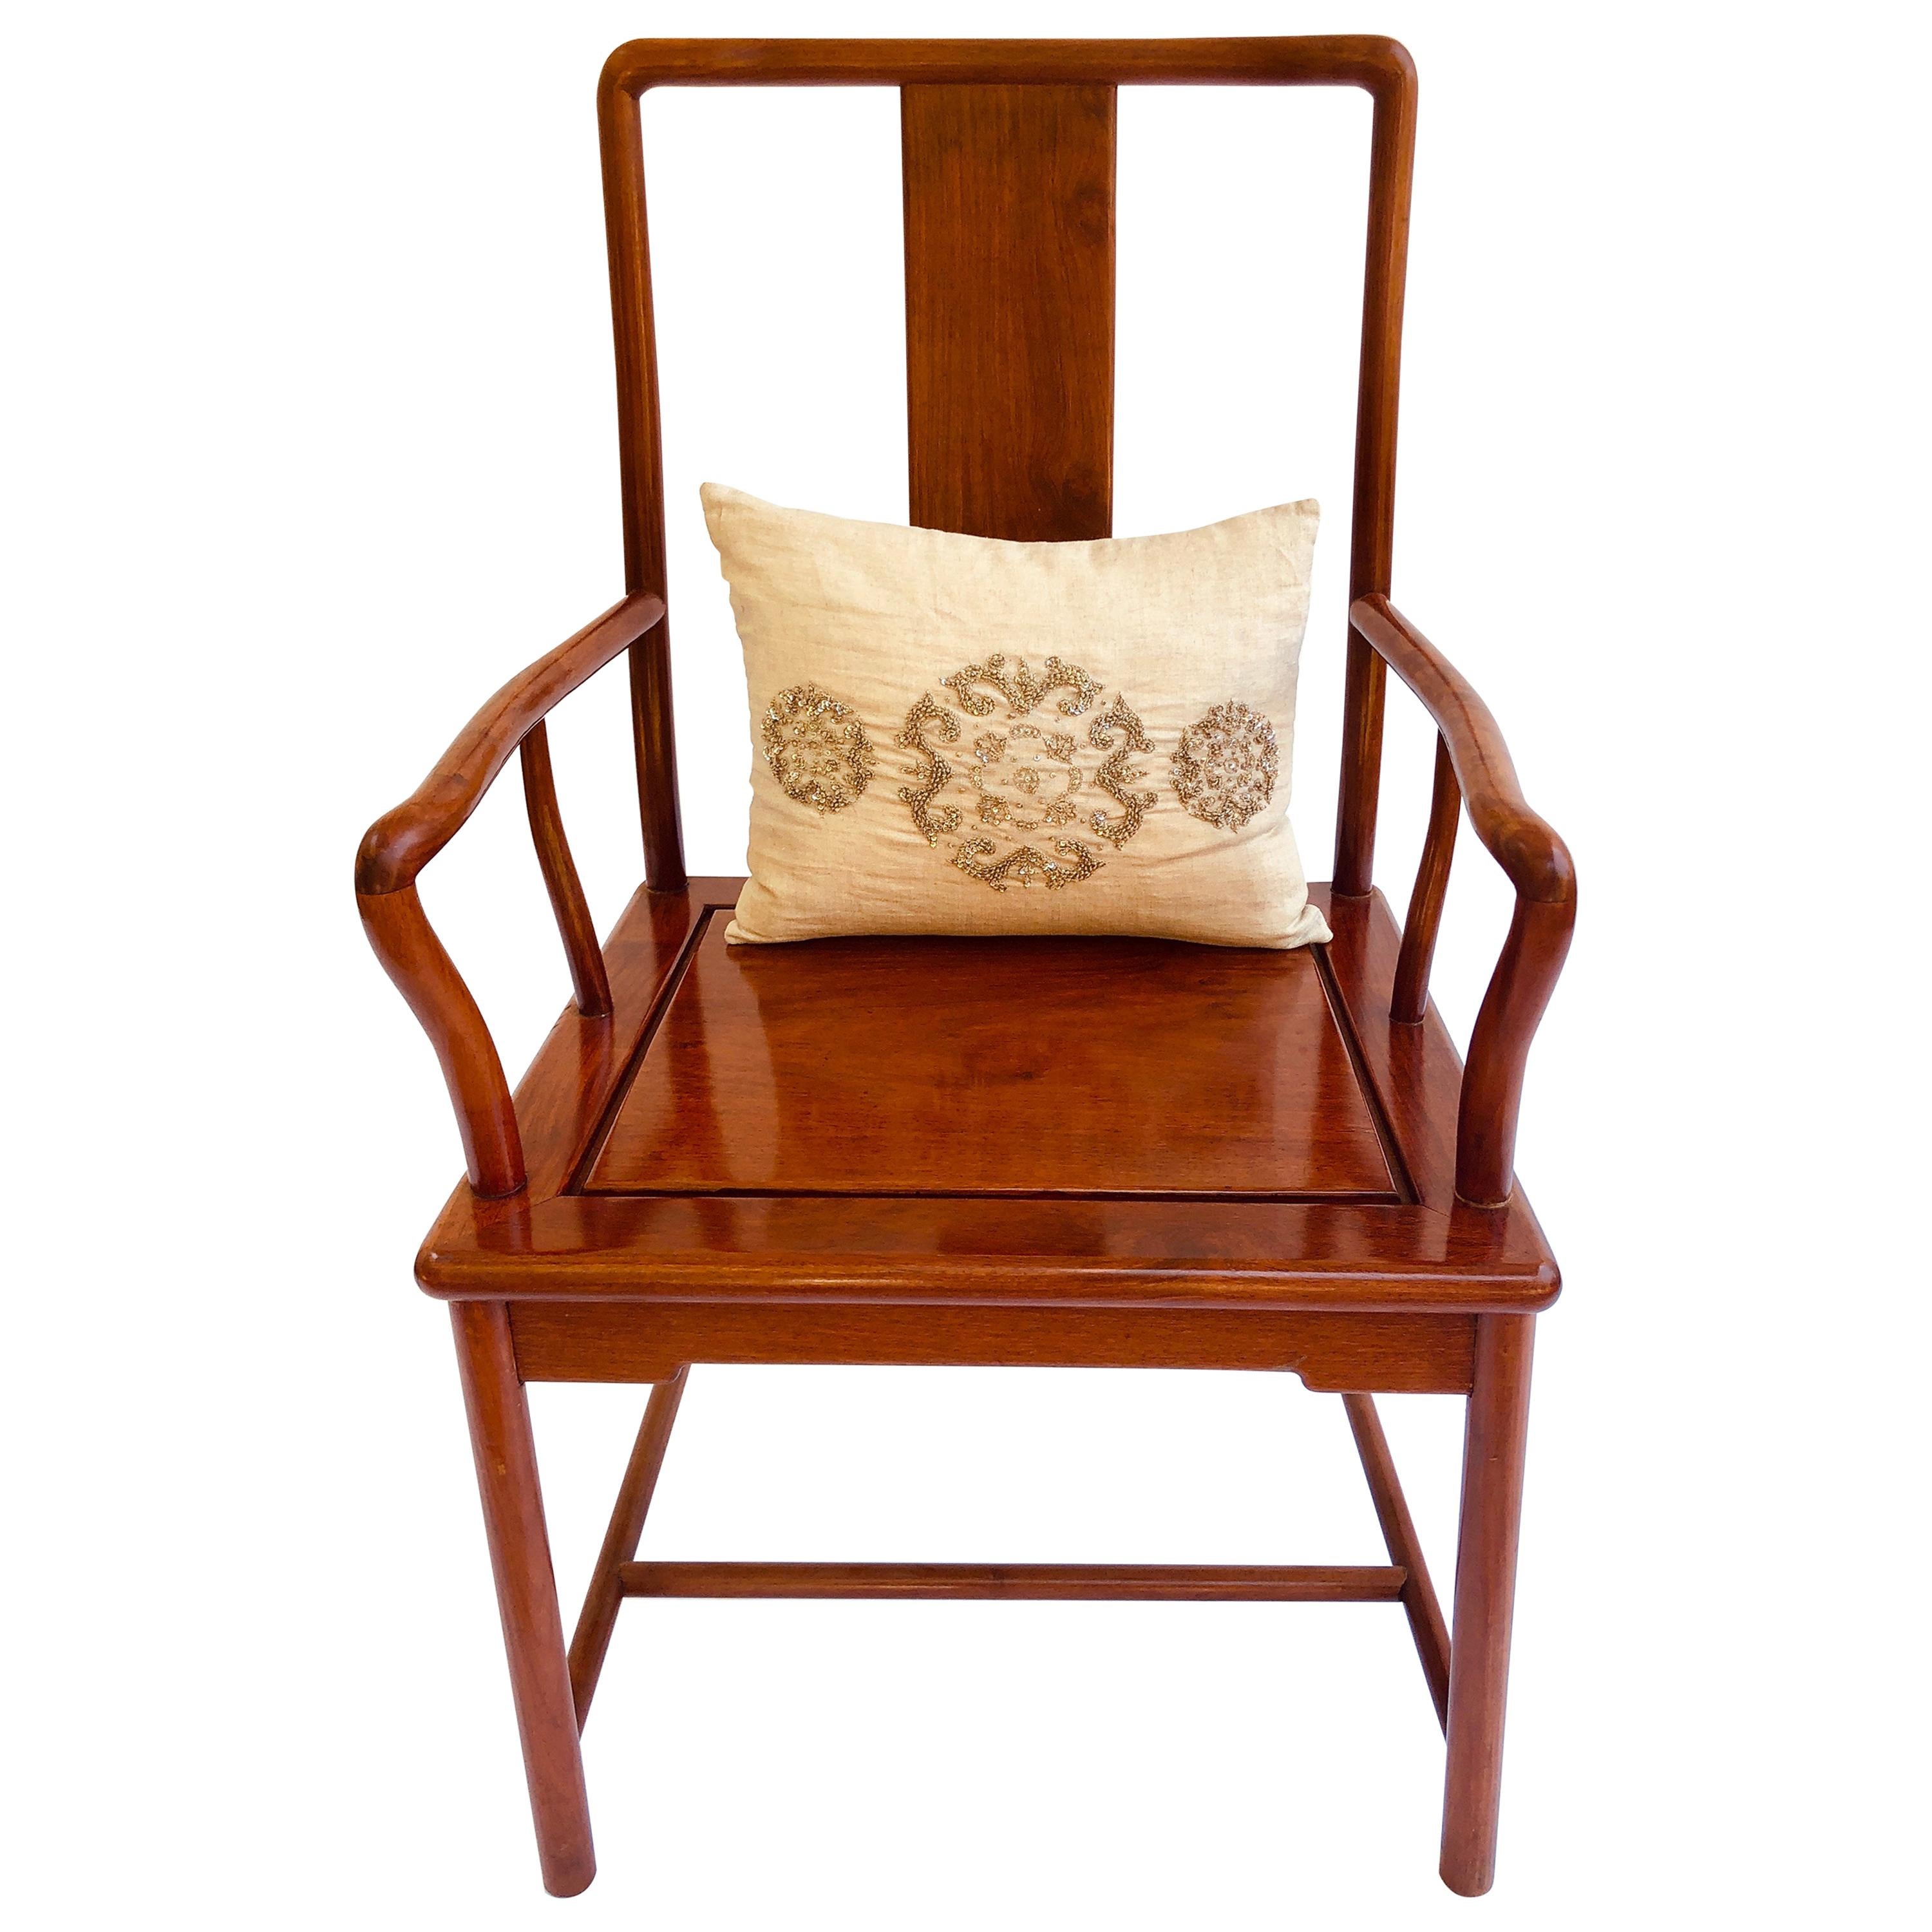 Unusual Antique Hardwood Chinese Armchair For Sale